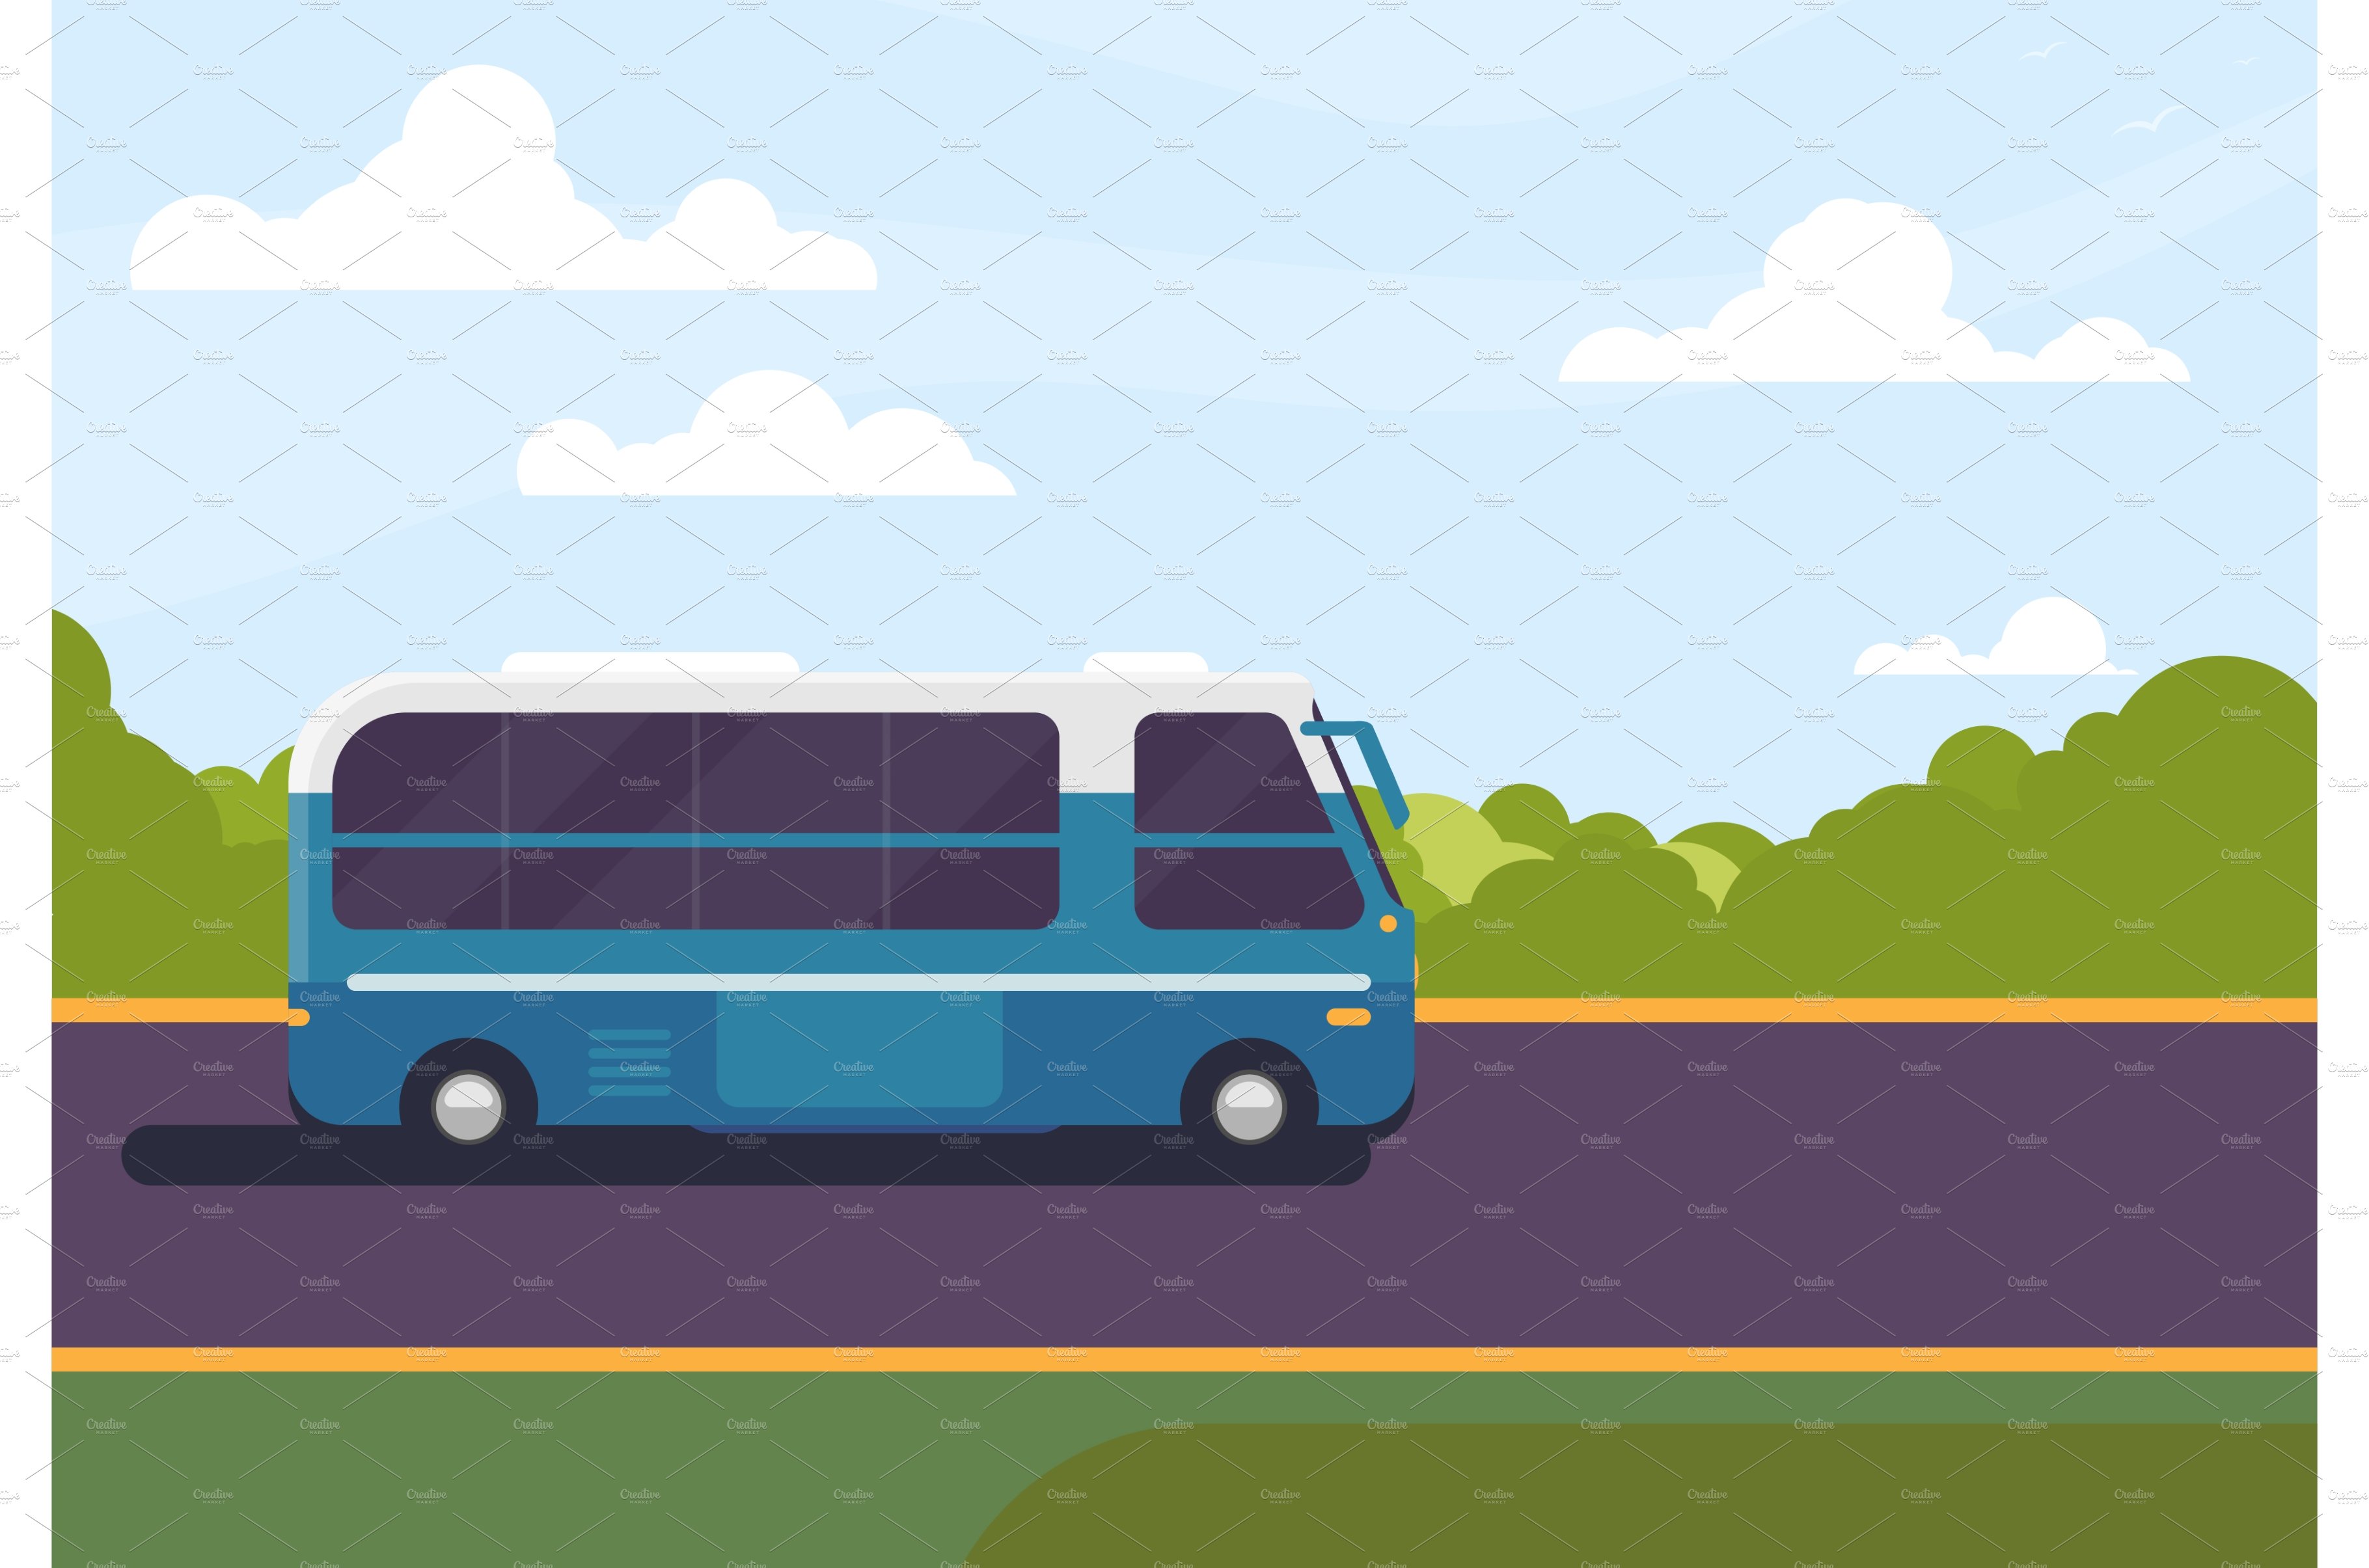 Bus on the road cover image.